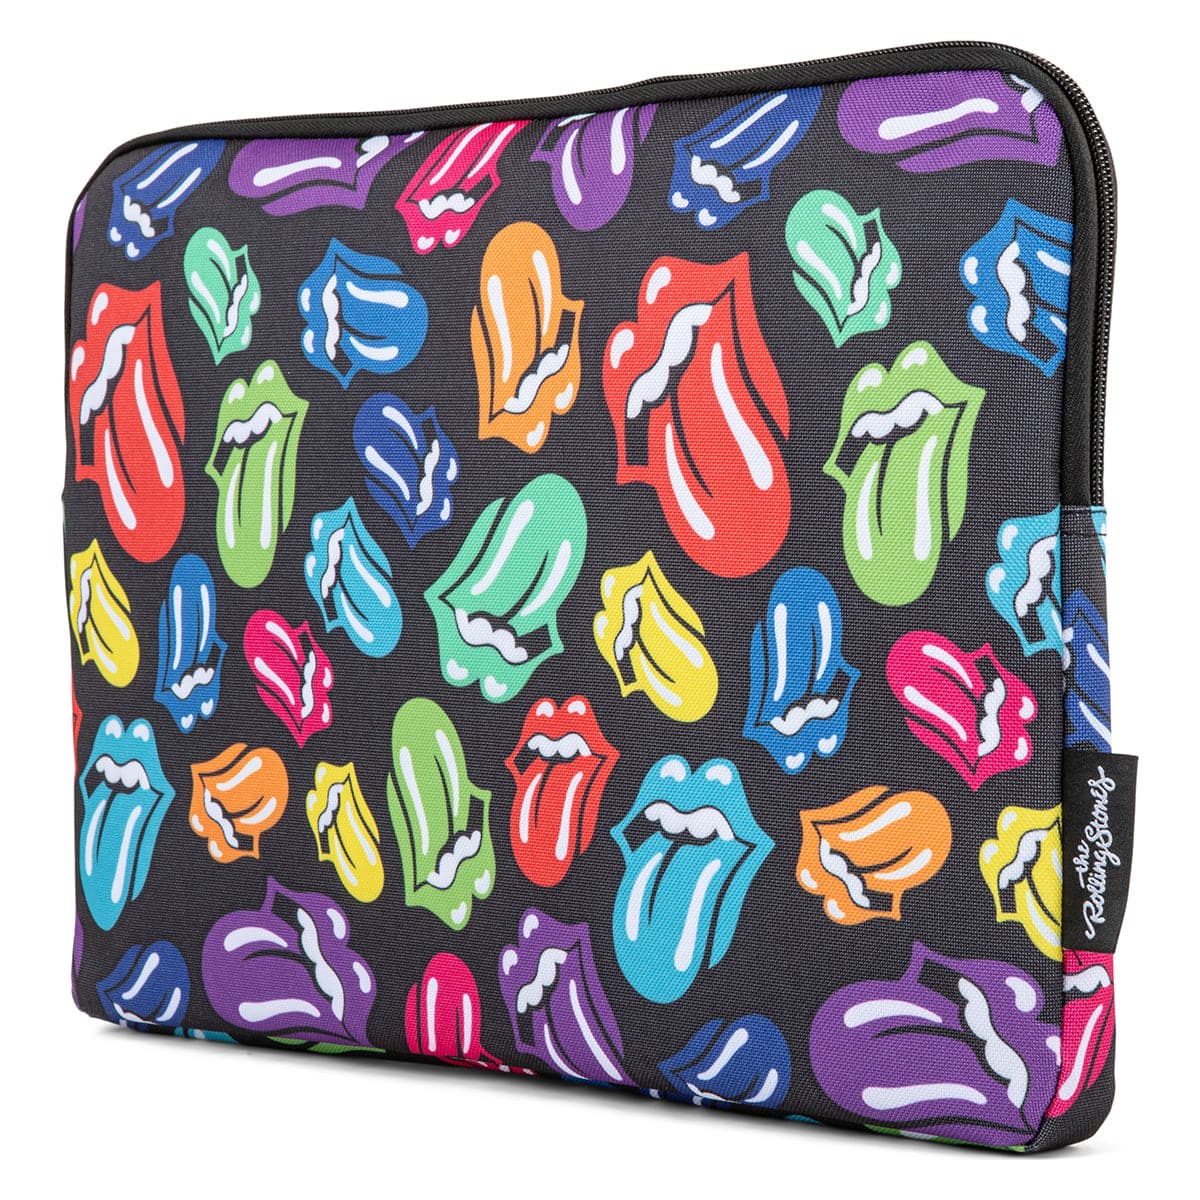 The Rolling Stones The Core Laptop Sleeve